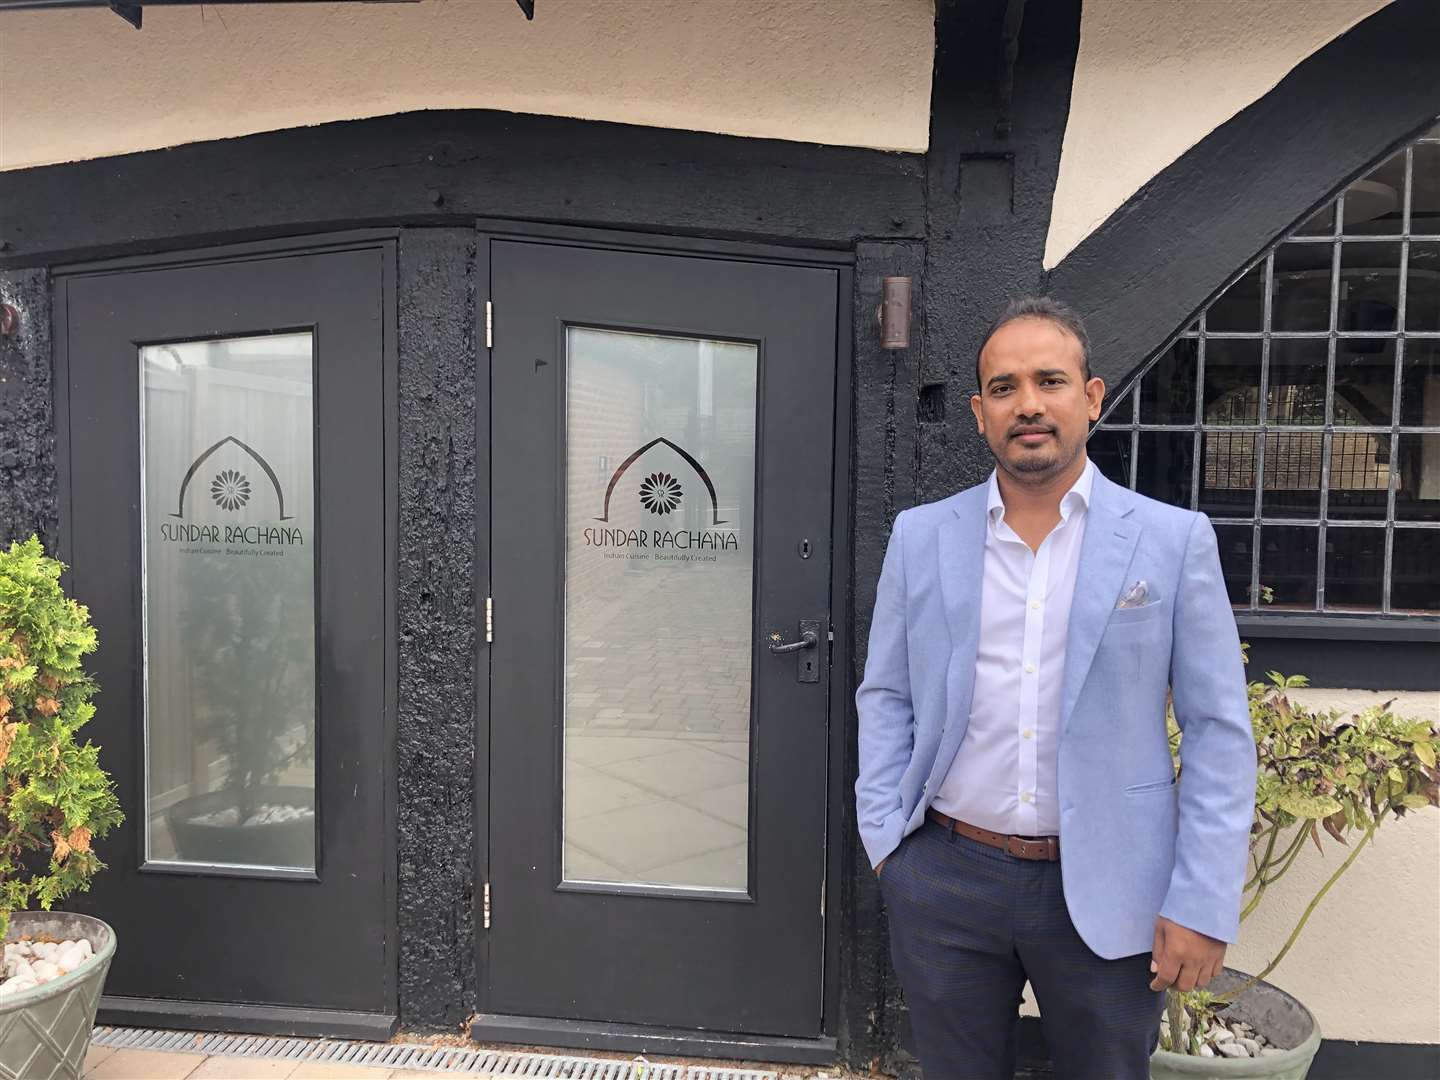 Saif Islam owner of Sundar Rachana is concerned over the rising costs